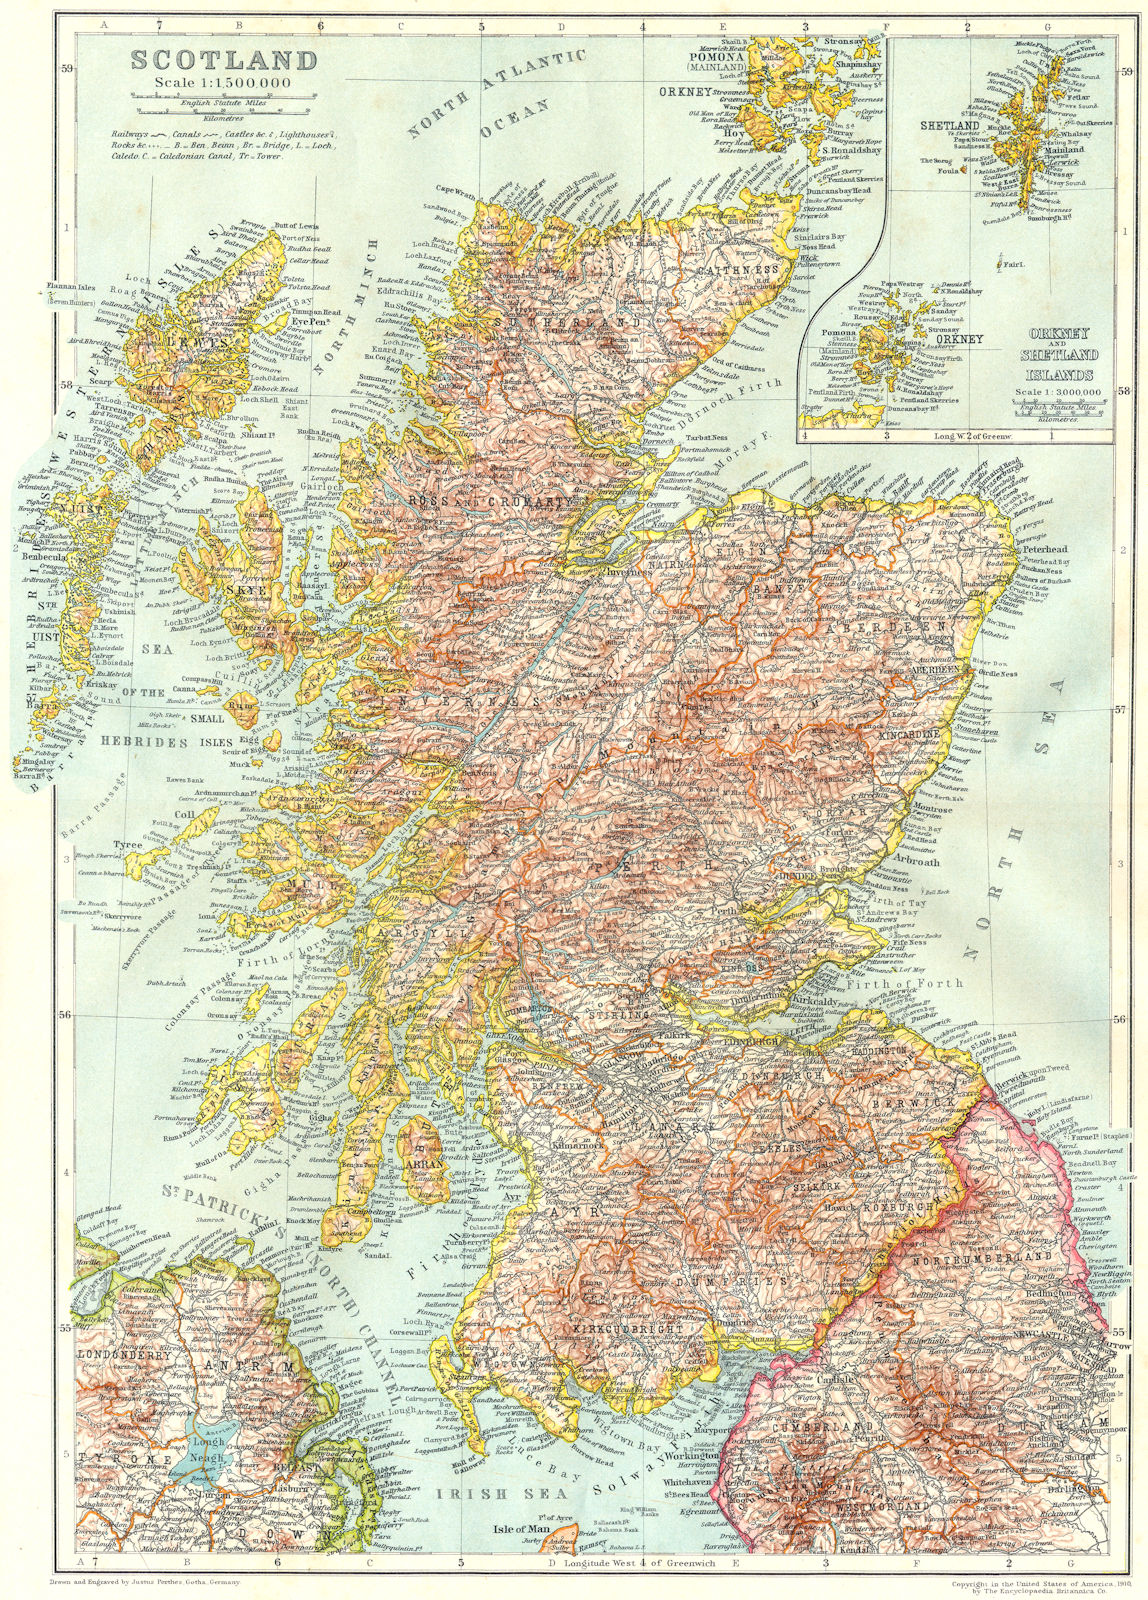 Associate Product SCOTLAND. Scotland; Inset maps of Orkney and Shetland Islands 1910 old